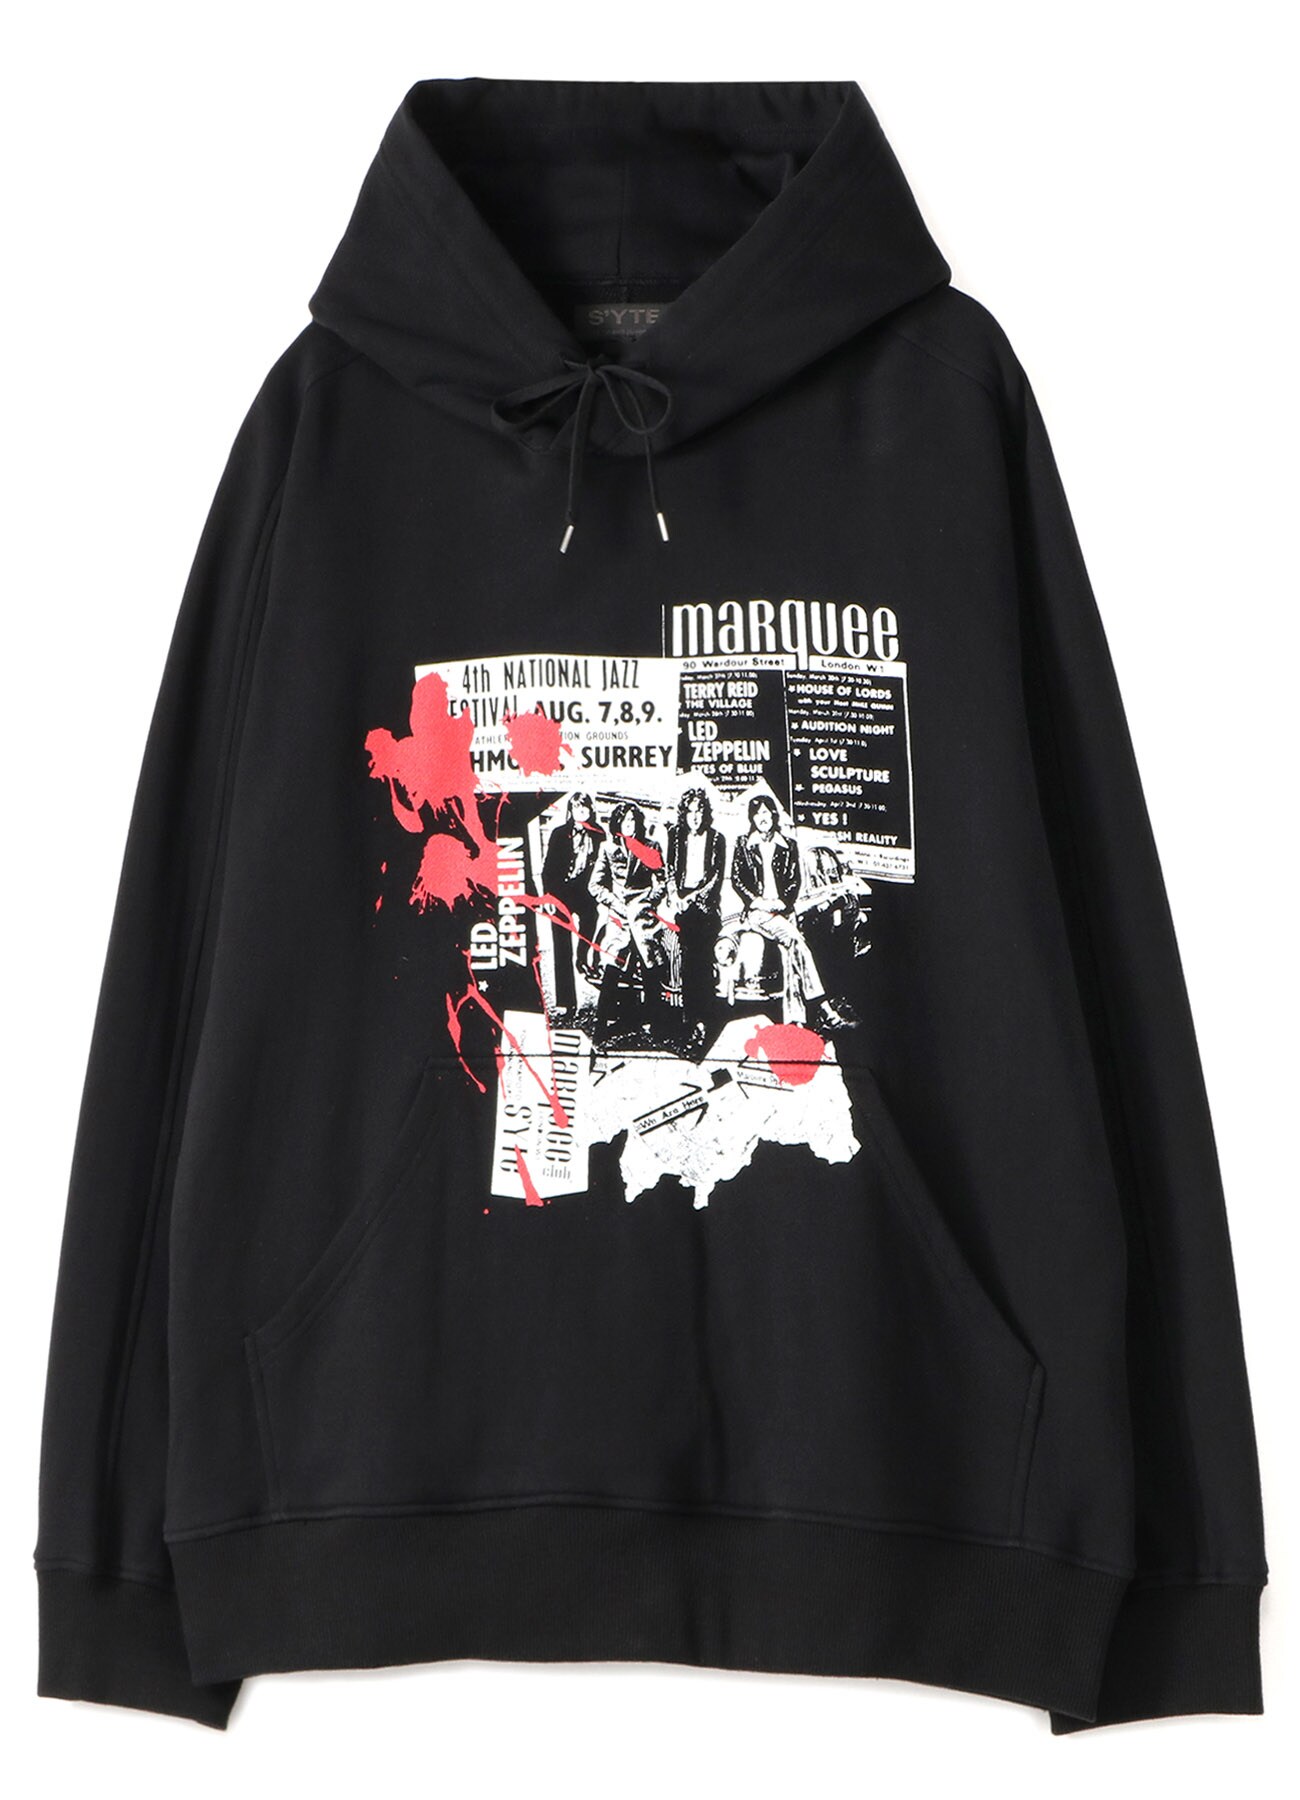 S’YTE × marquee club(R) French Terry Stitch Work Photograph Hoodie